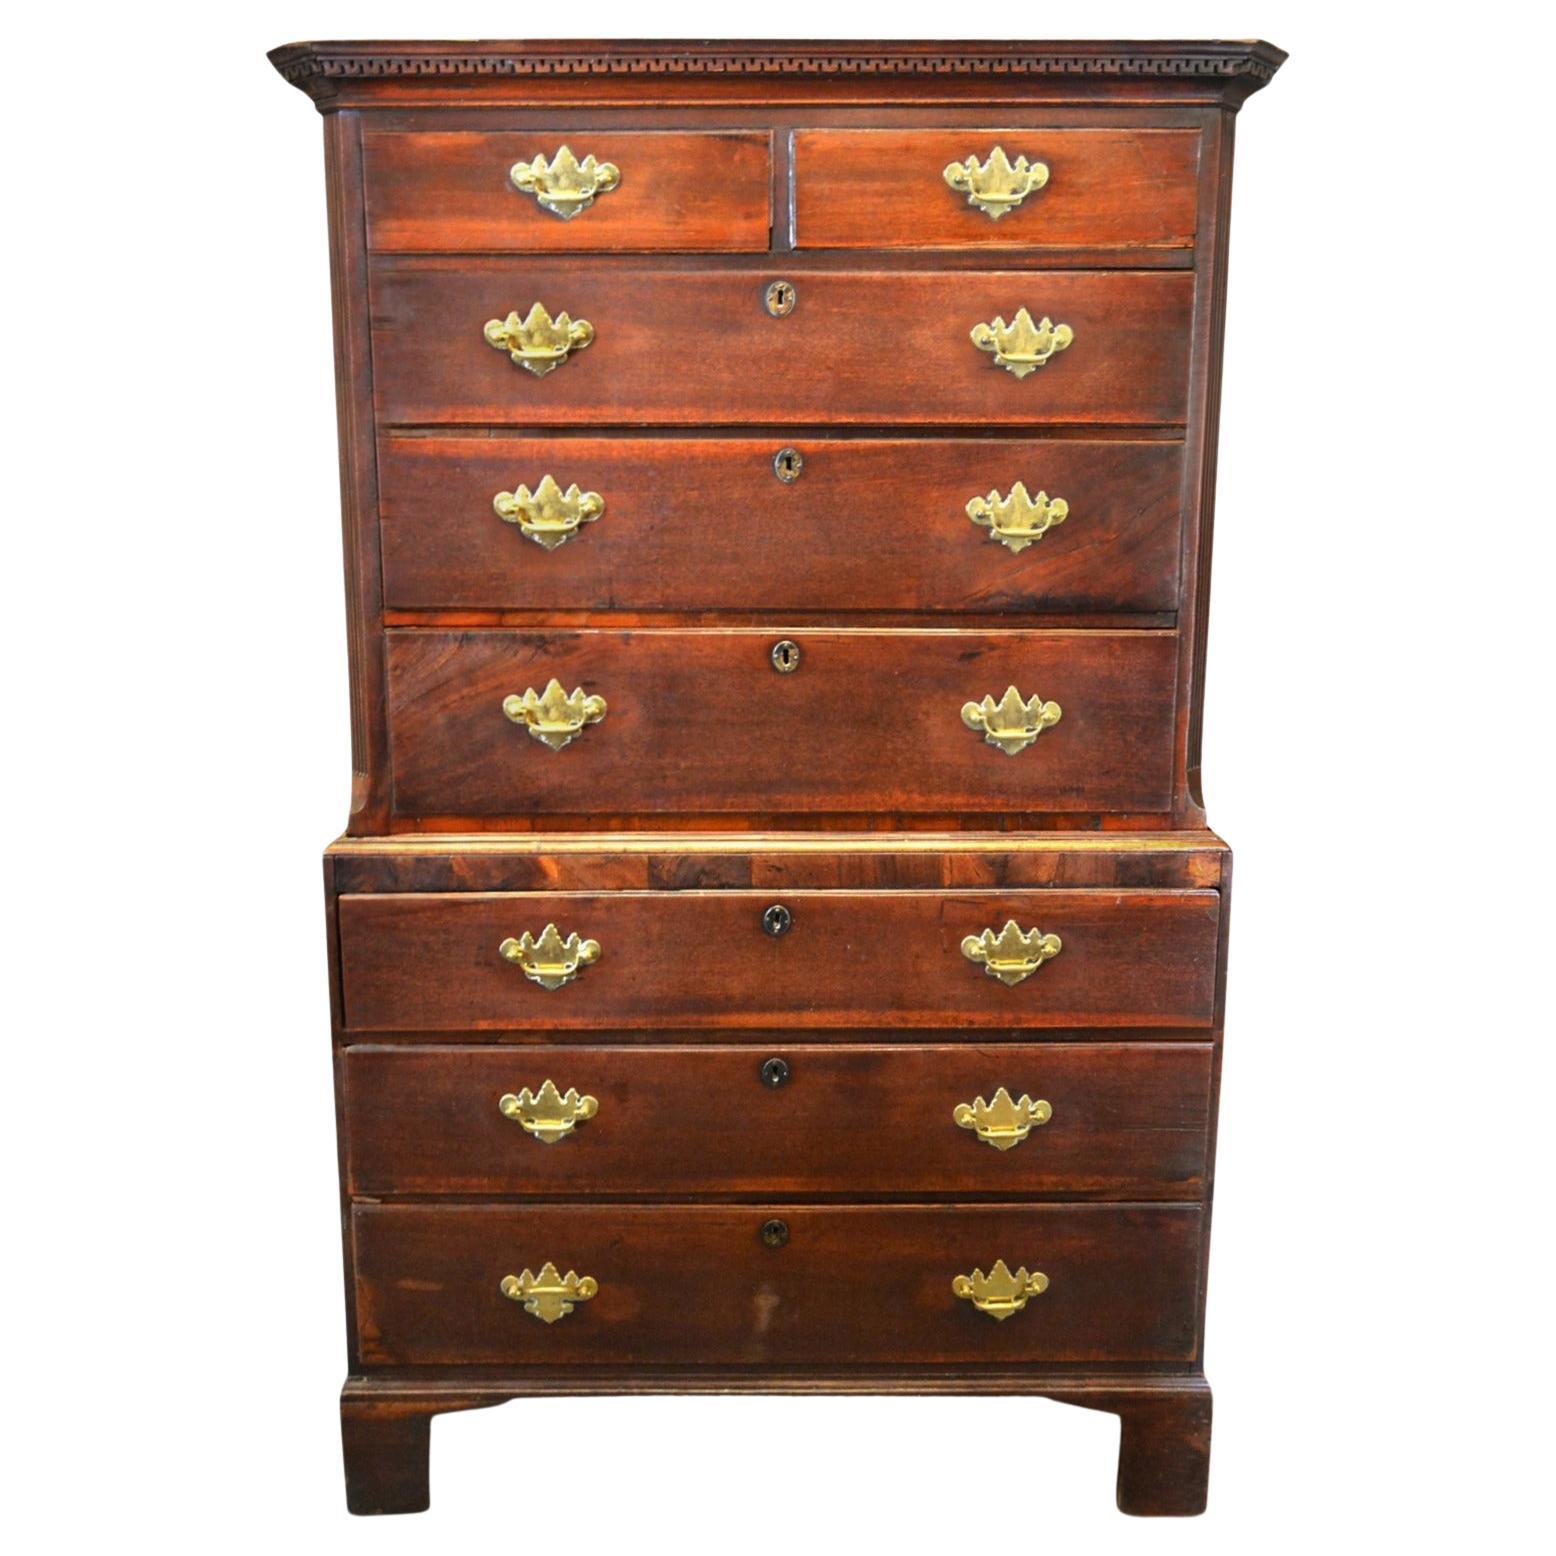 George III Figured Mahogany Chest on Chest, With Greek Key Moulded Cornice With Two Short & Six Long Drawers with Brass Handles Raised upon Bracket Feet

Height: circa 175 cm.